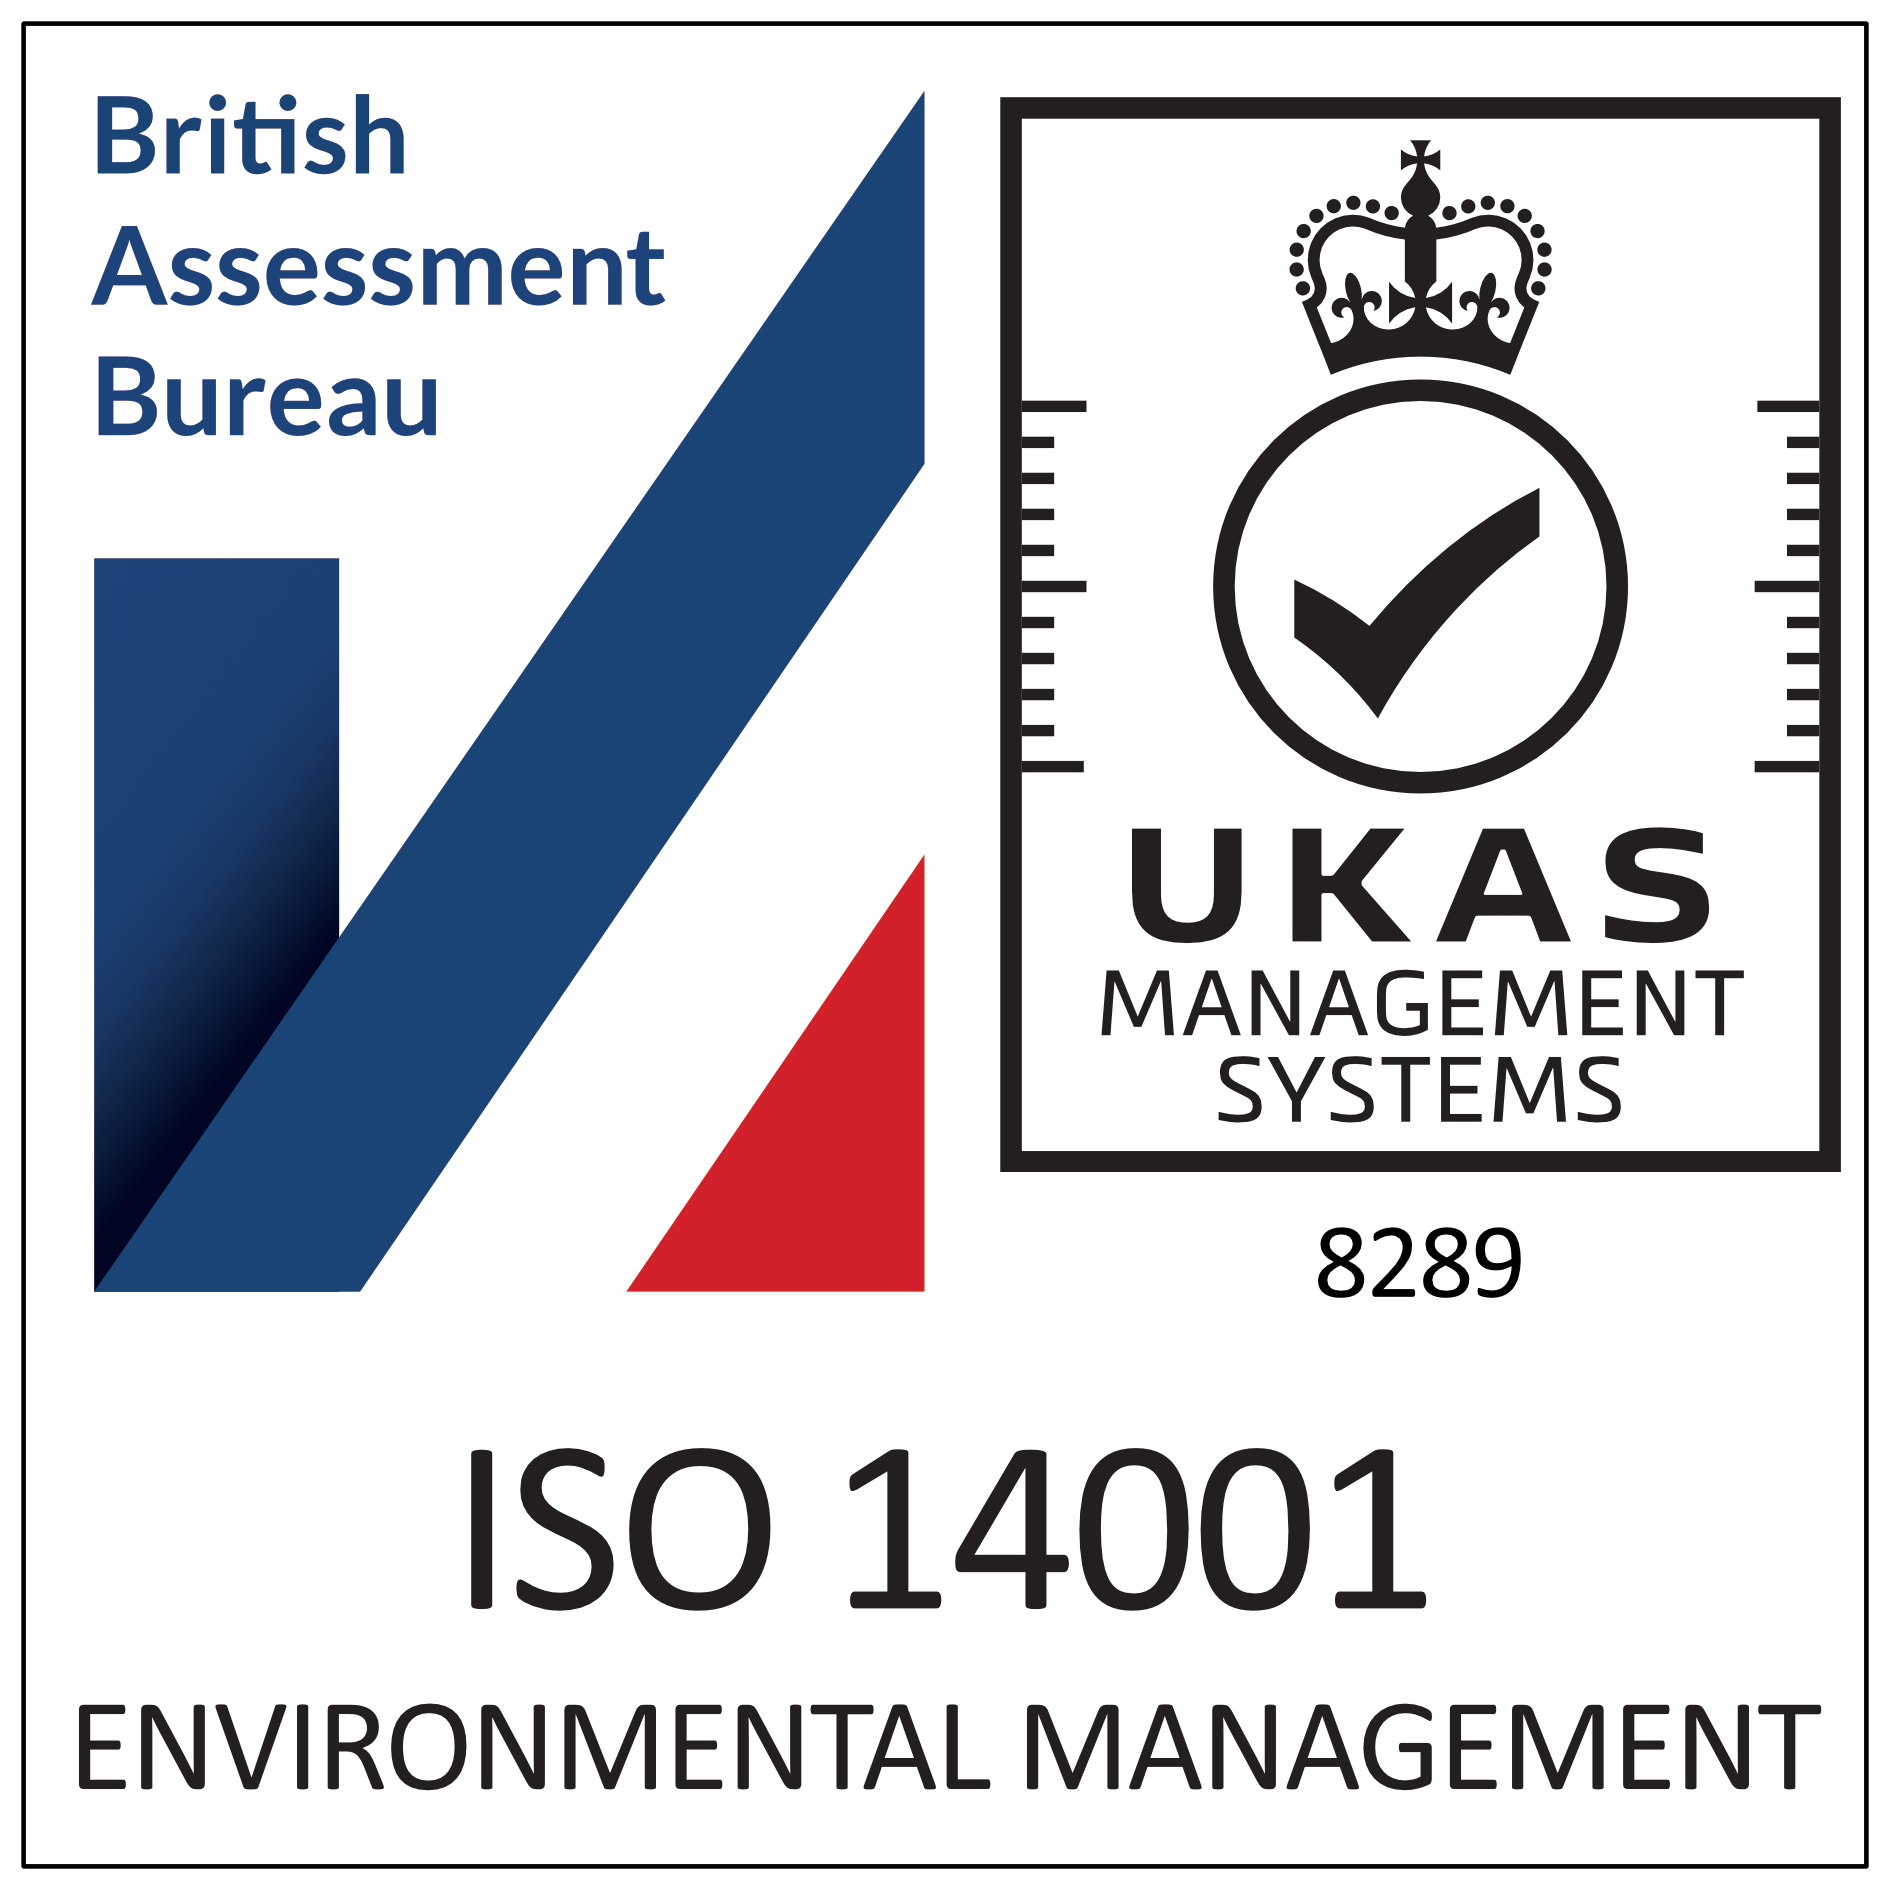 Certified to the ISO 14001 environmental standard